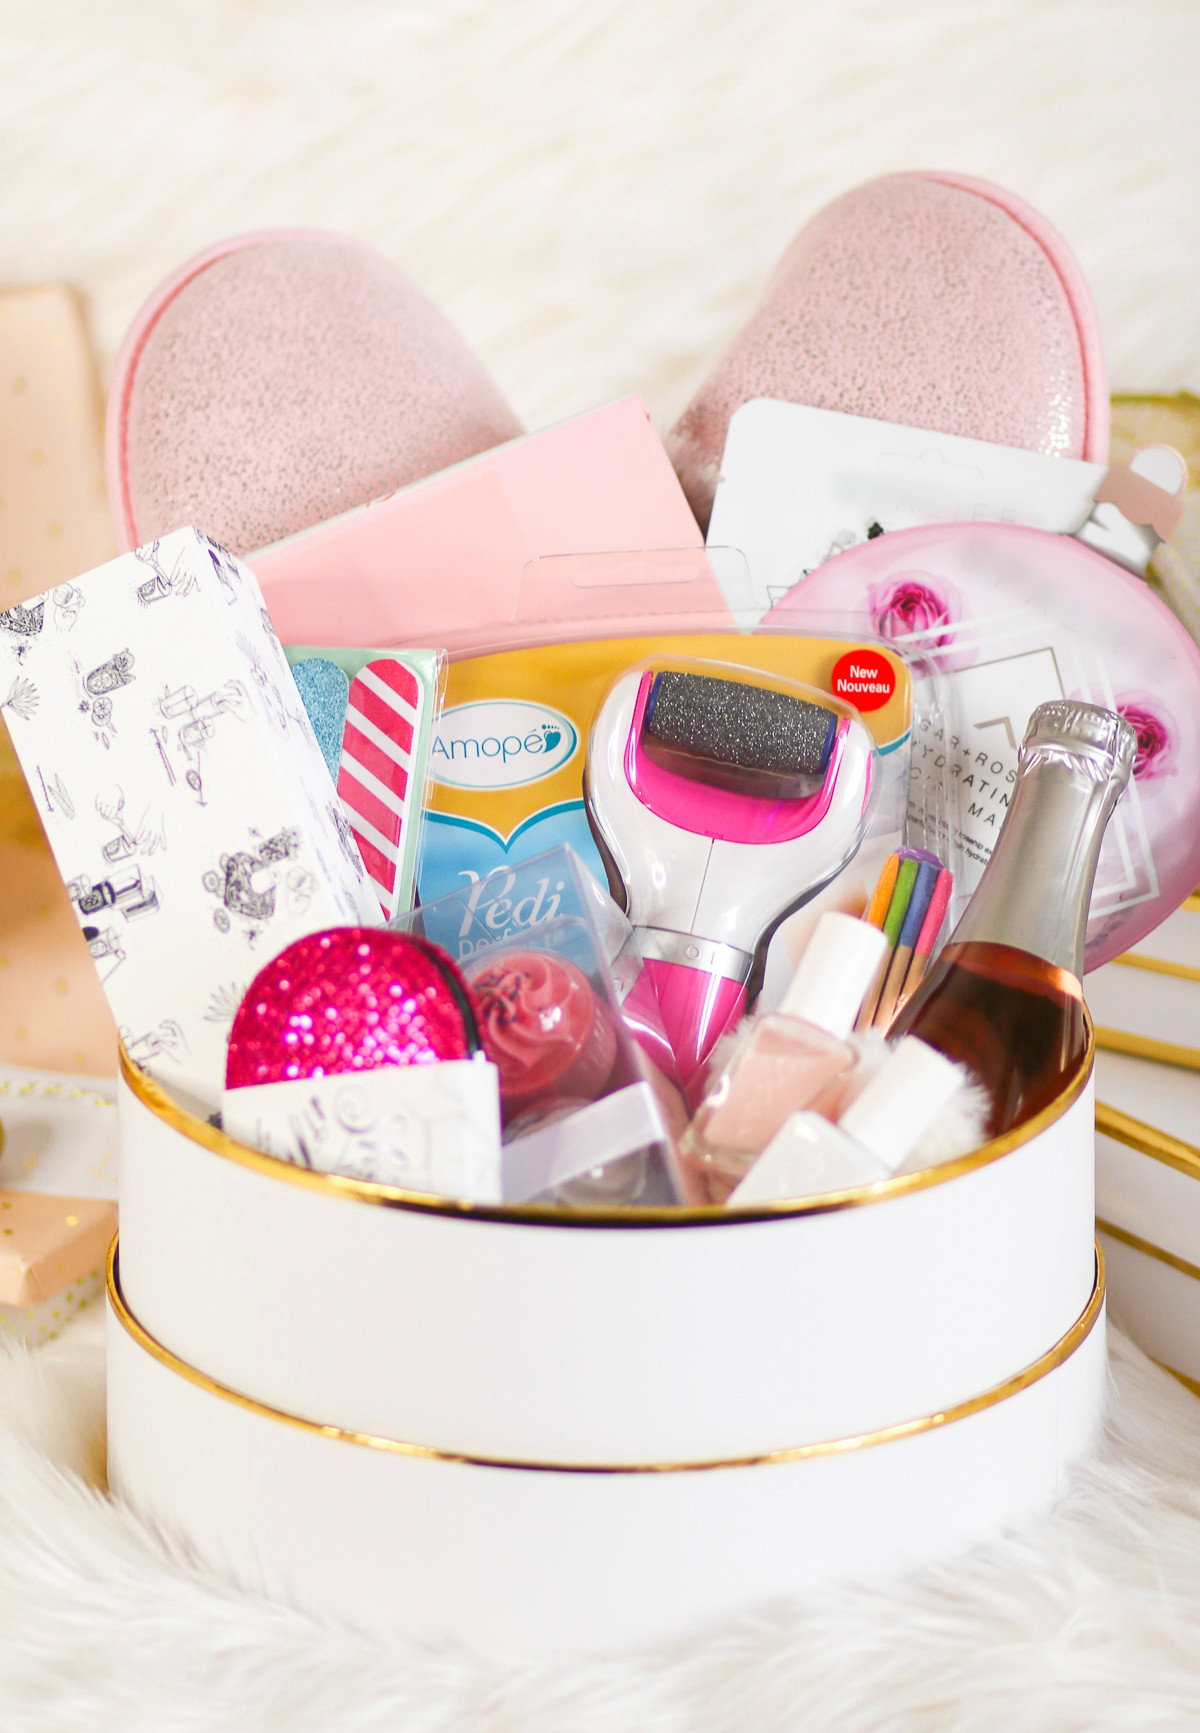 Self Care Gift Basket Ideas
 DIY Self Care Gift Basket A Collection of 12 Awesome Self